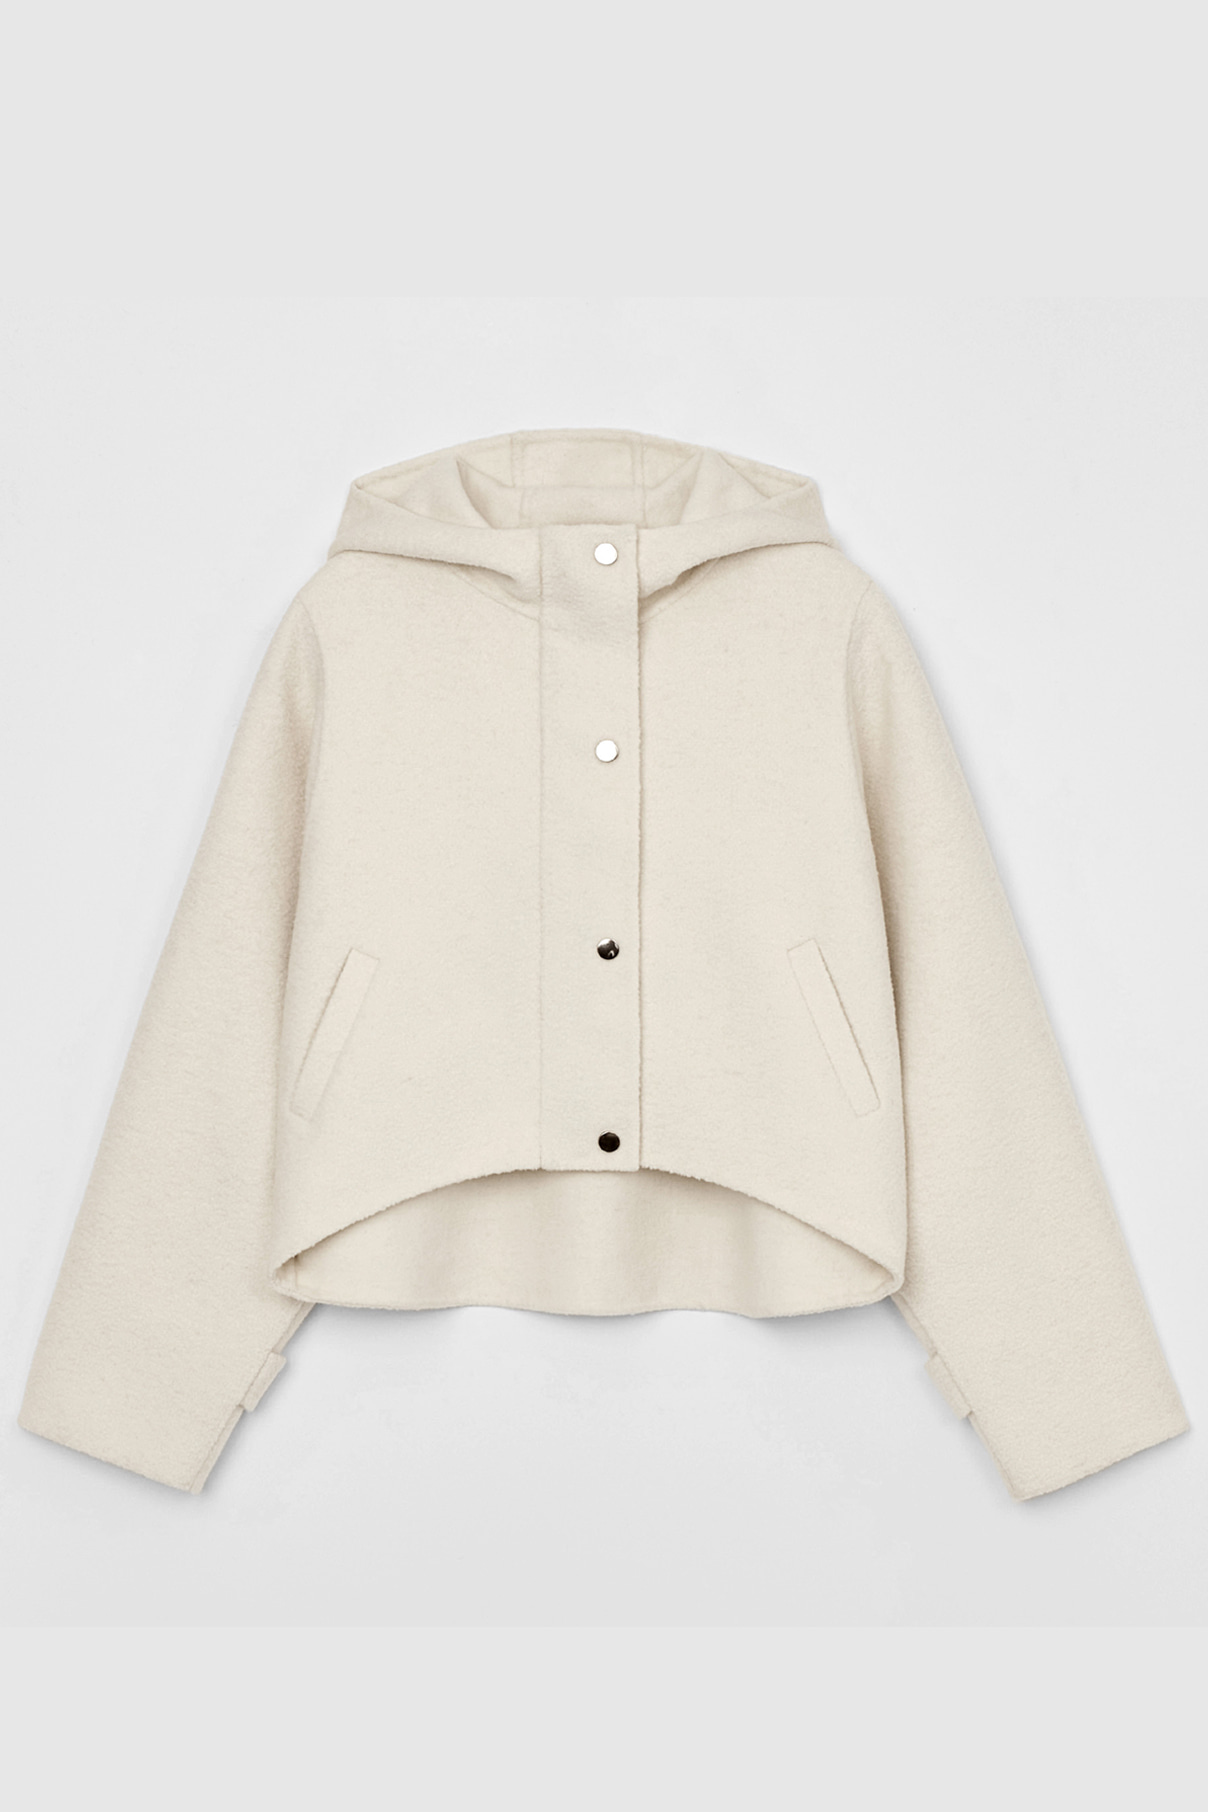 [Limited] Becky Coat / White